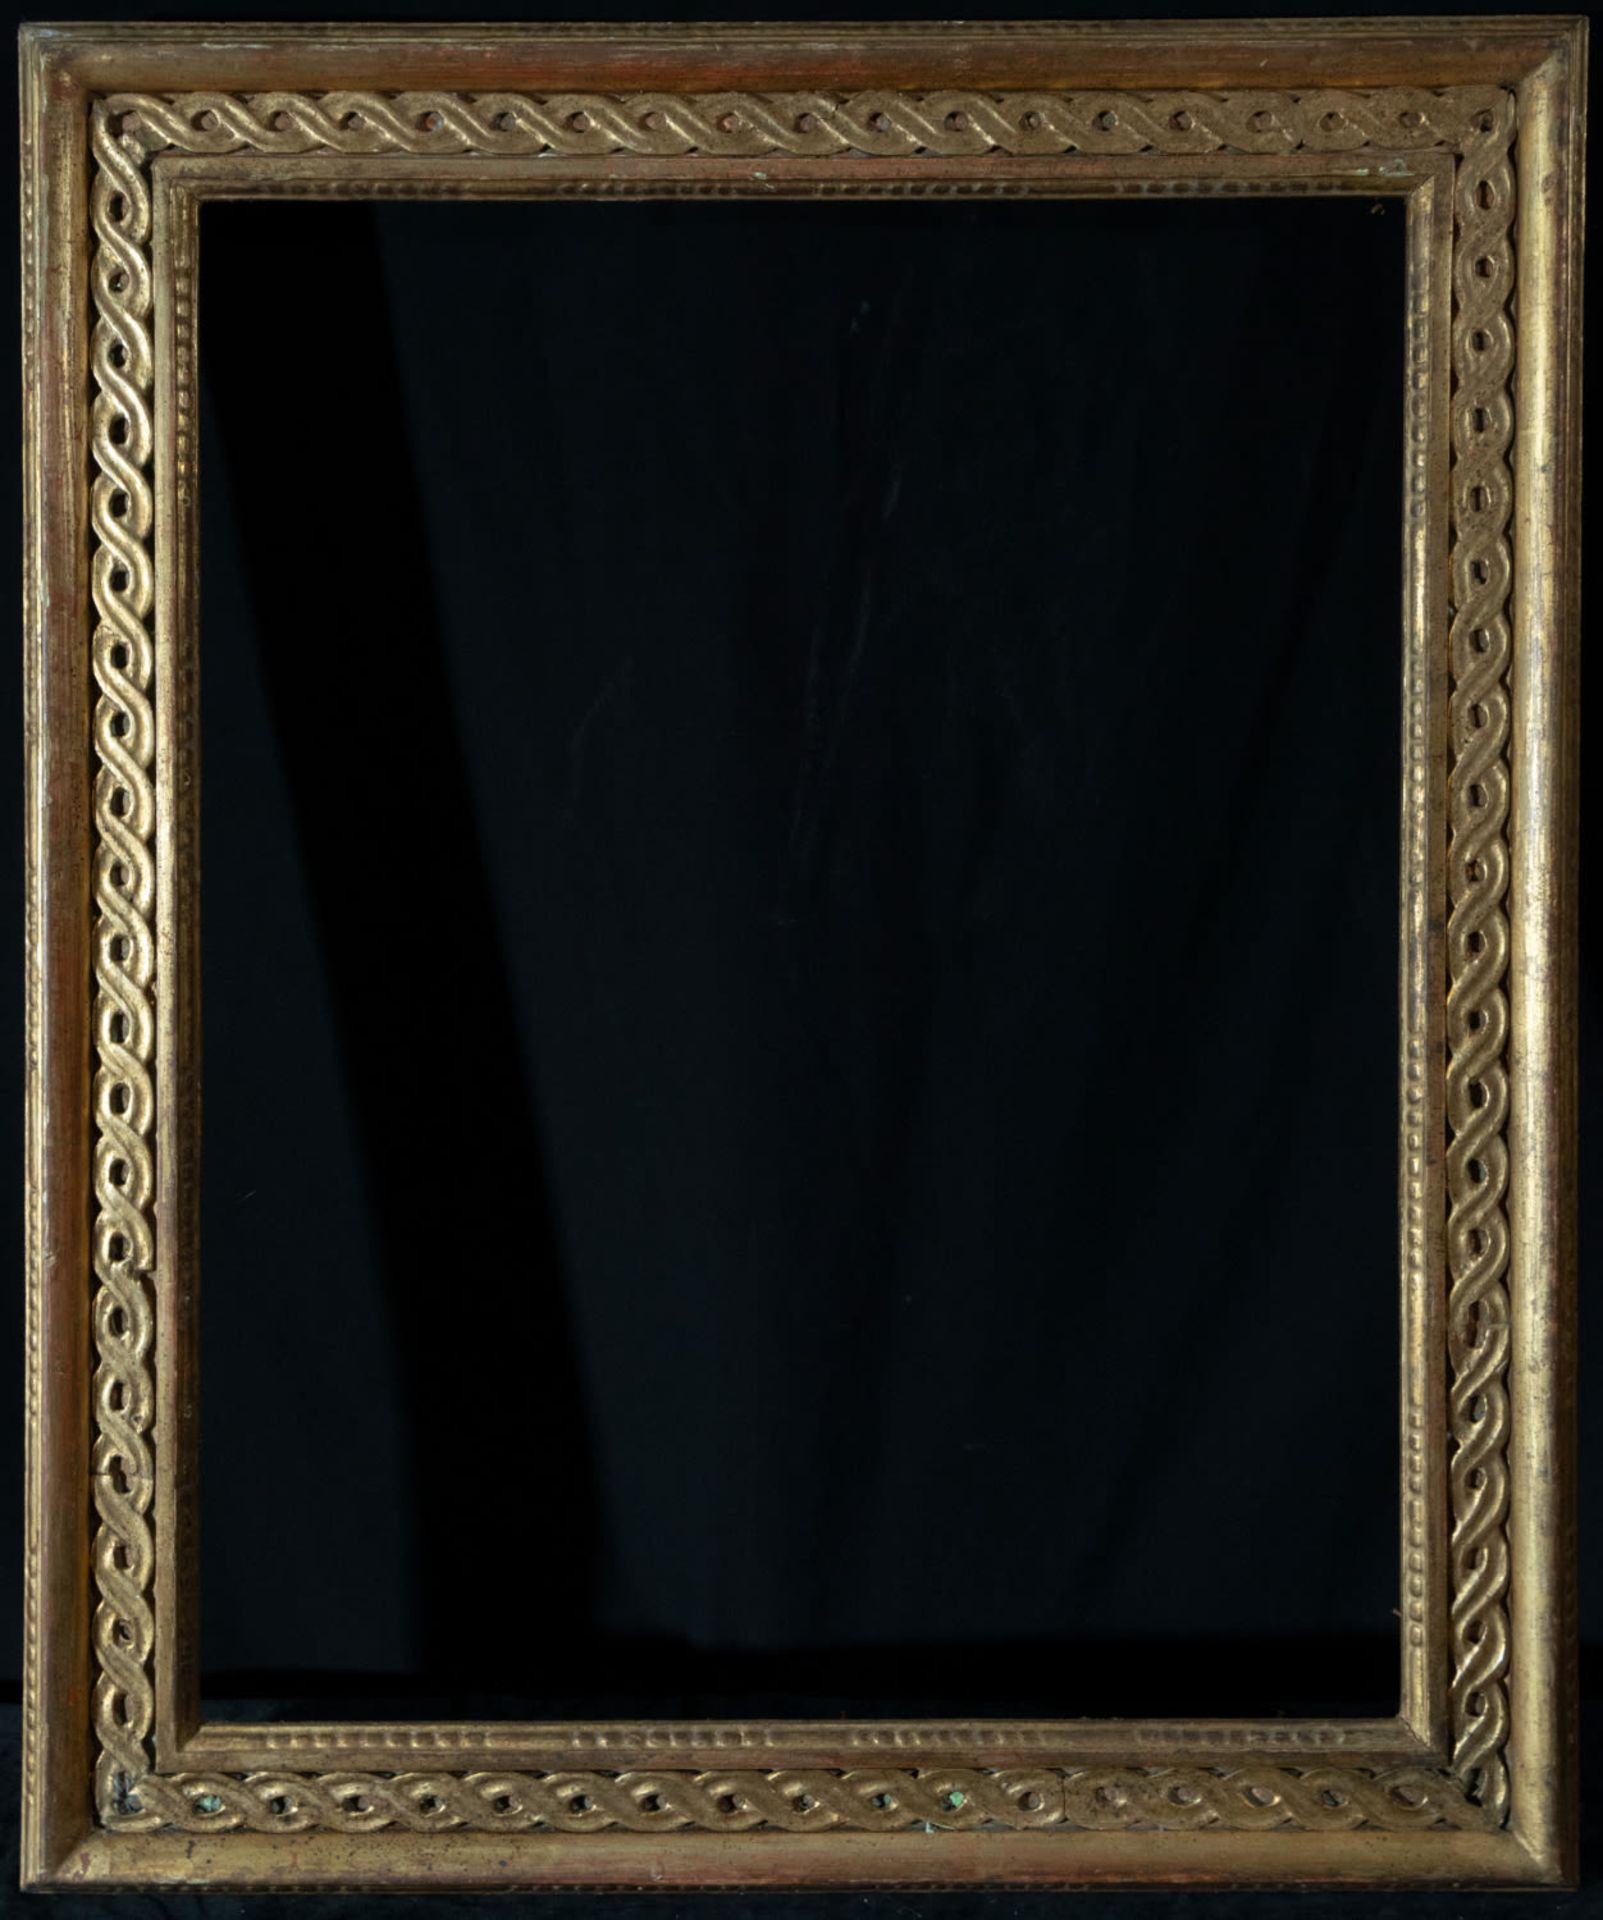 Italian Neoclassical frame in wood gilded with fine gold, 19th century